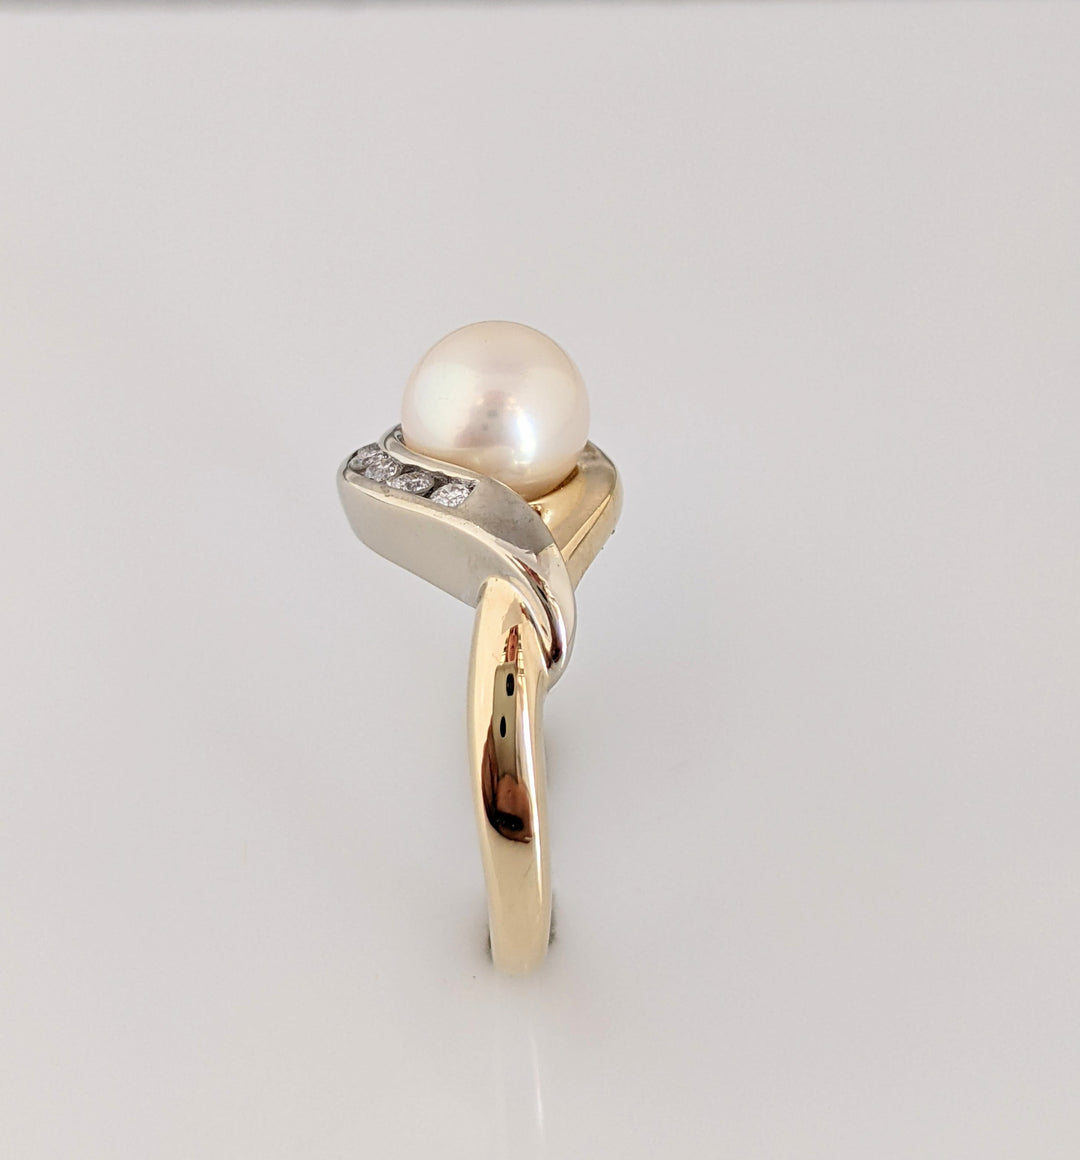 14K PEARL ROUND 6.5MM WITH (7) DIAMONDS ESTATE 3.5 GRAMS